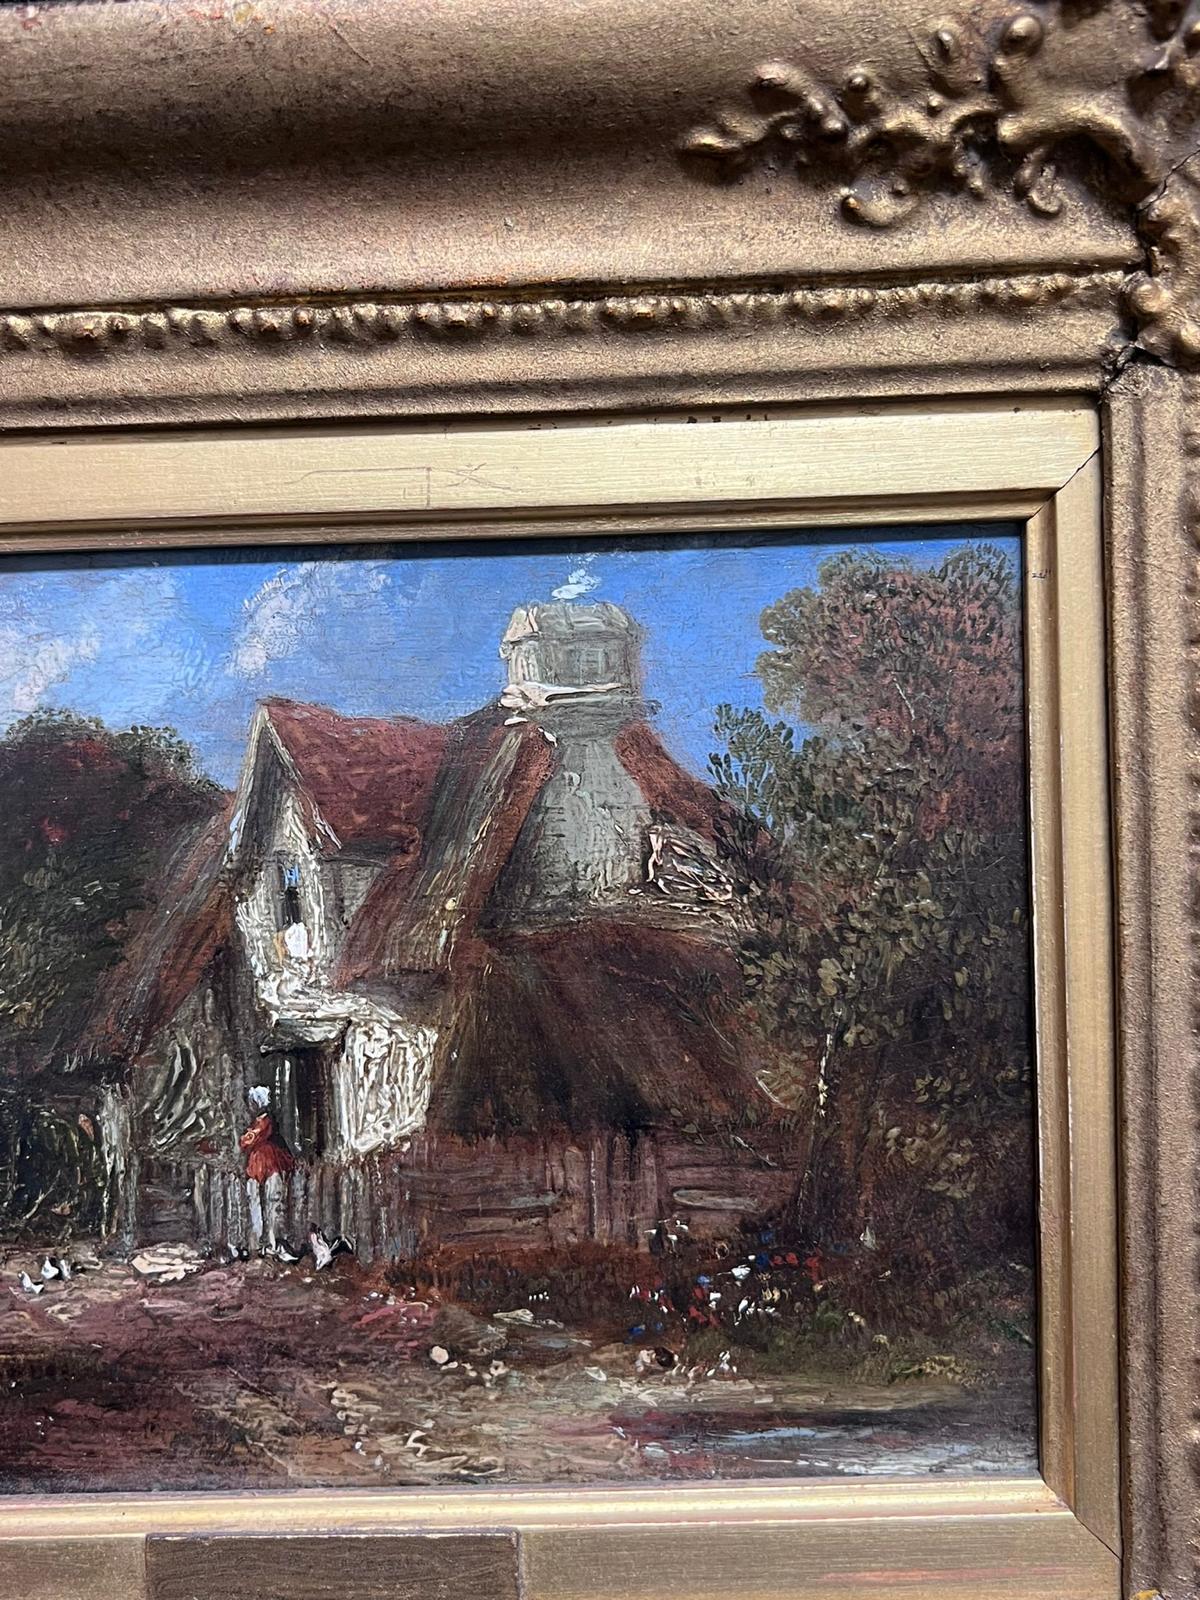 The Country Cottage
English School, first half 19th century
circle of John Constable
oil on board, framed
framed: 10.5 x 12 inches
board: 6 x 8 inches
provenance: private collection
condition: very good and sound condition